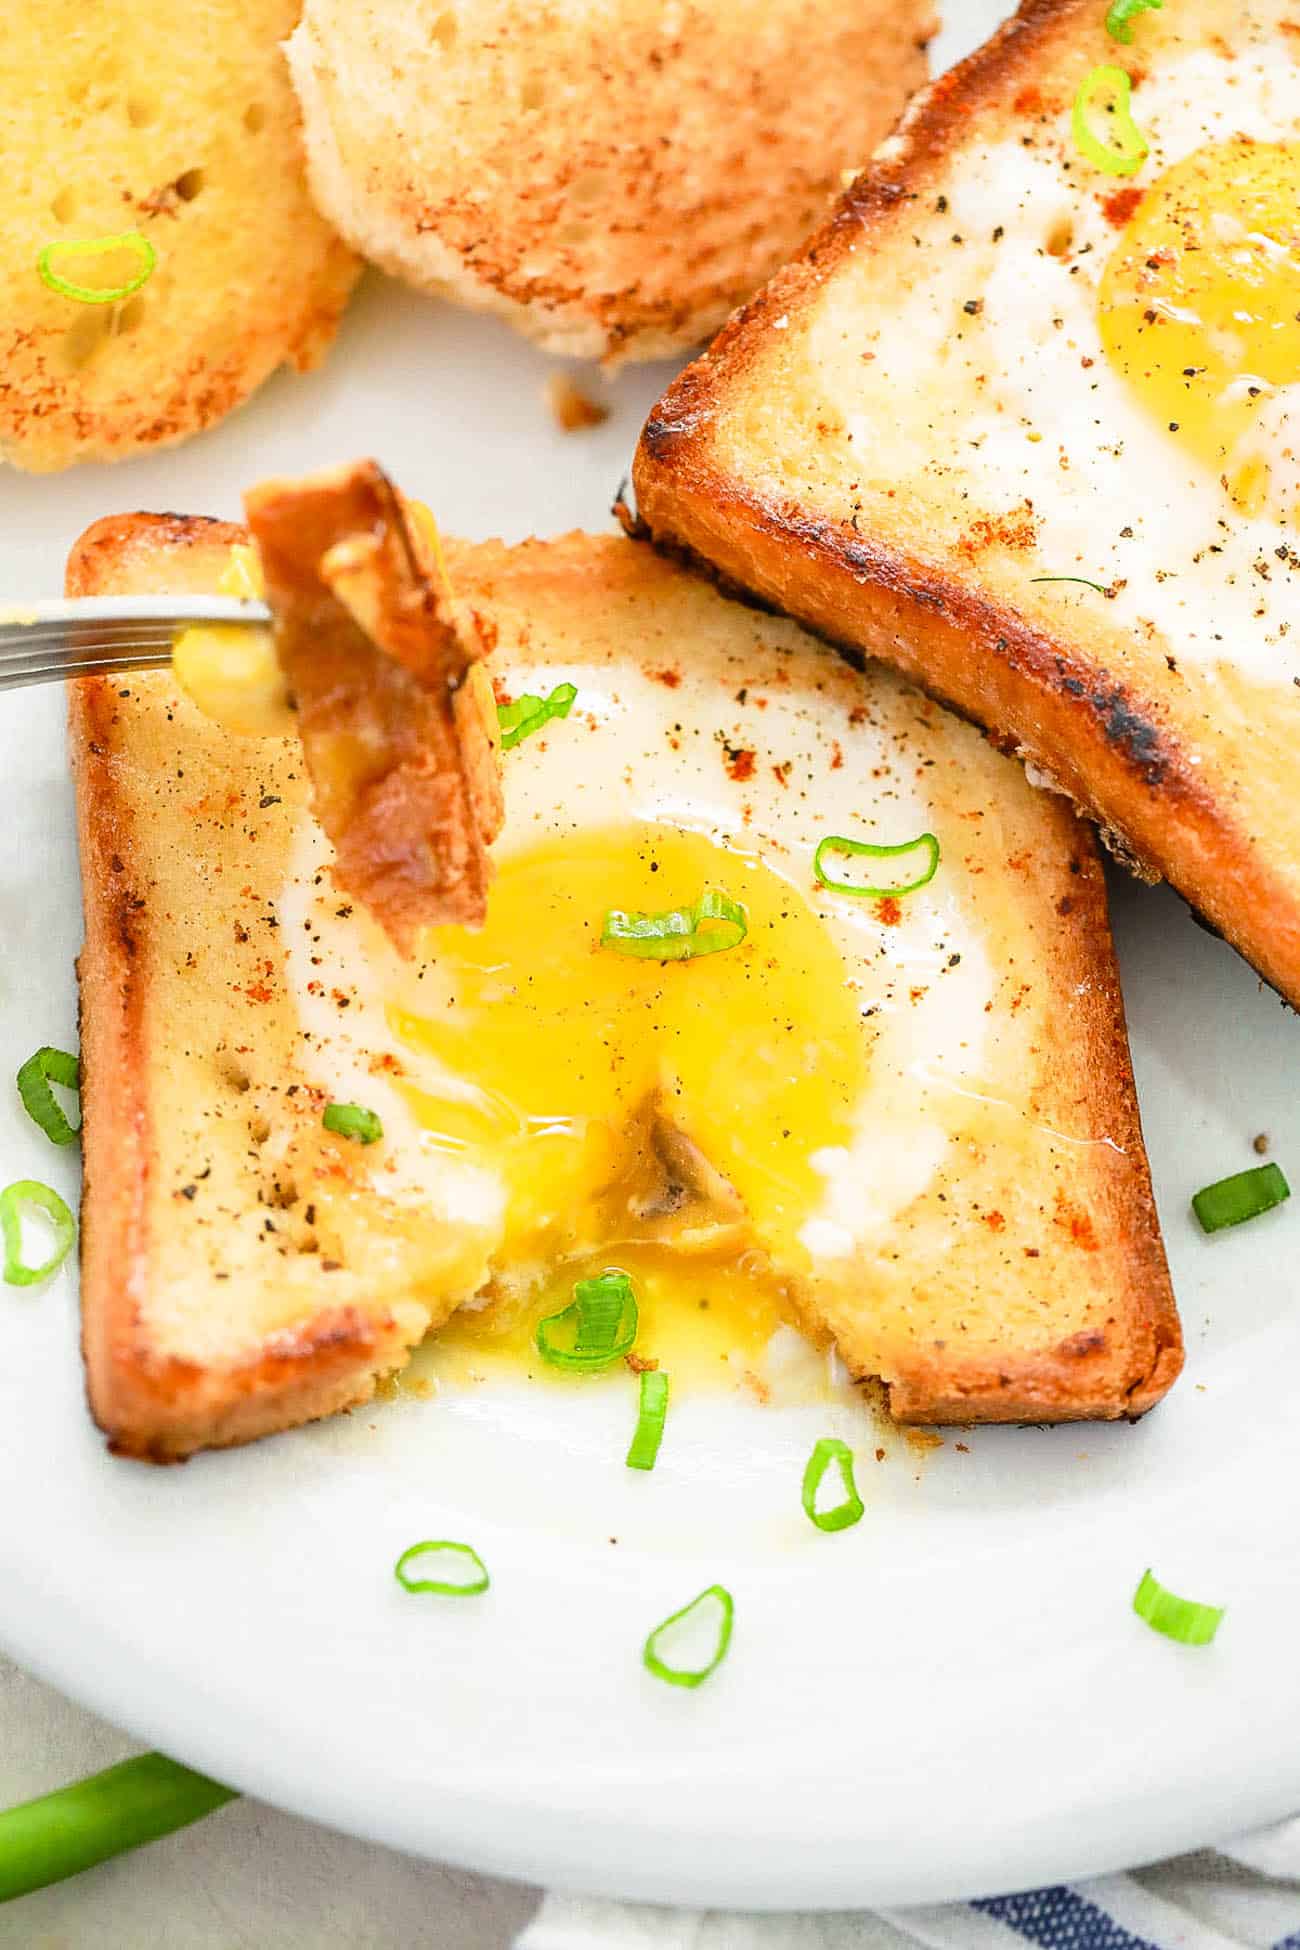 eggs in a basket - a classic breakfast served on a white plate